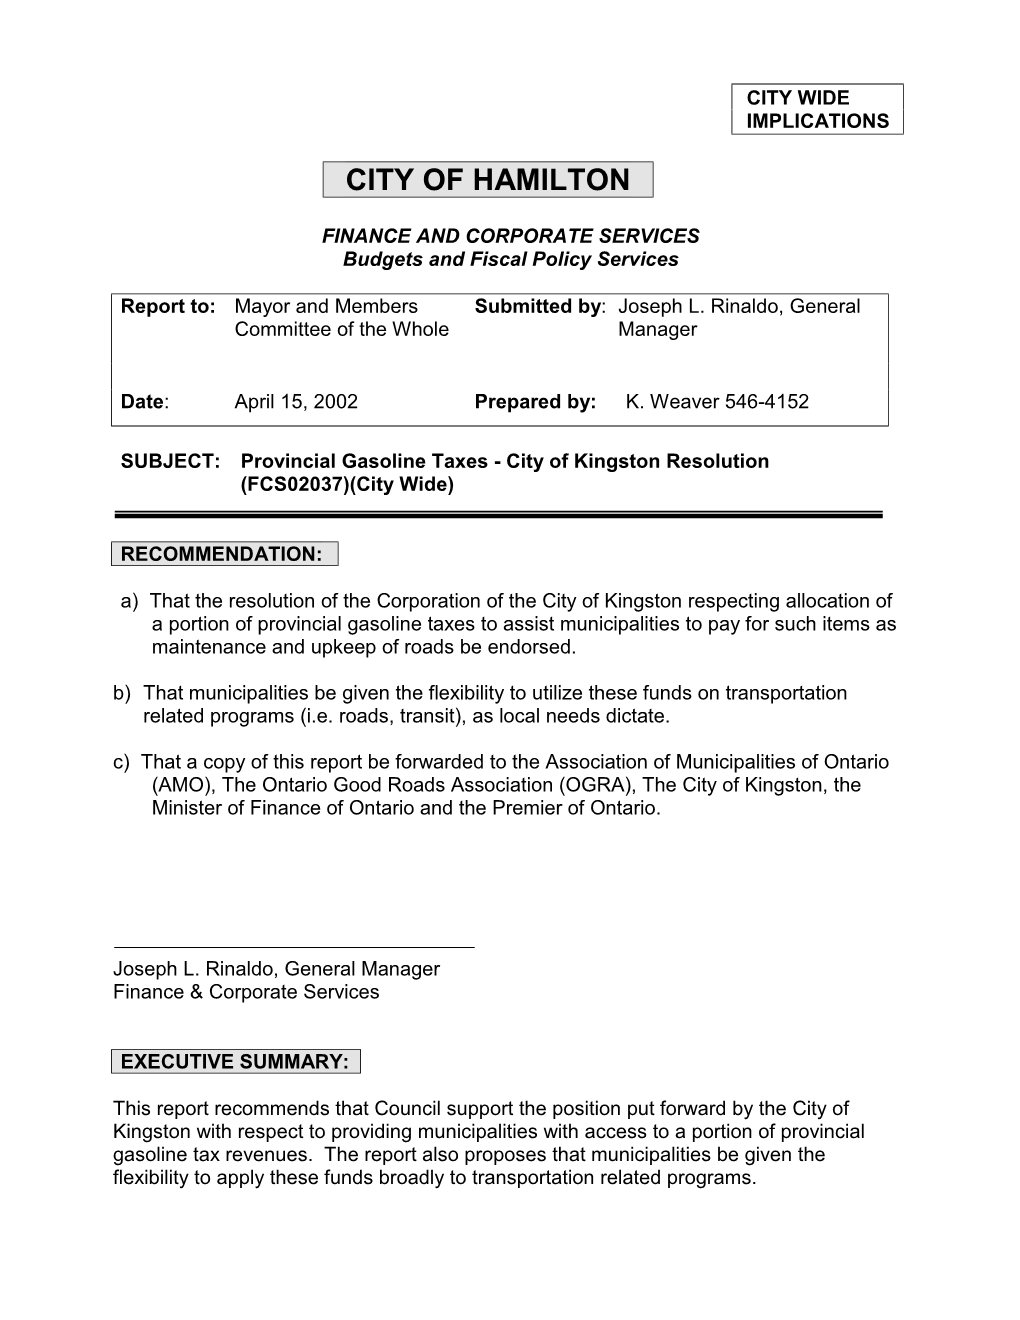 Provincial Gasoline Taxes - City of Kingston Resolution (FCS02037)(City Wide)